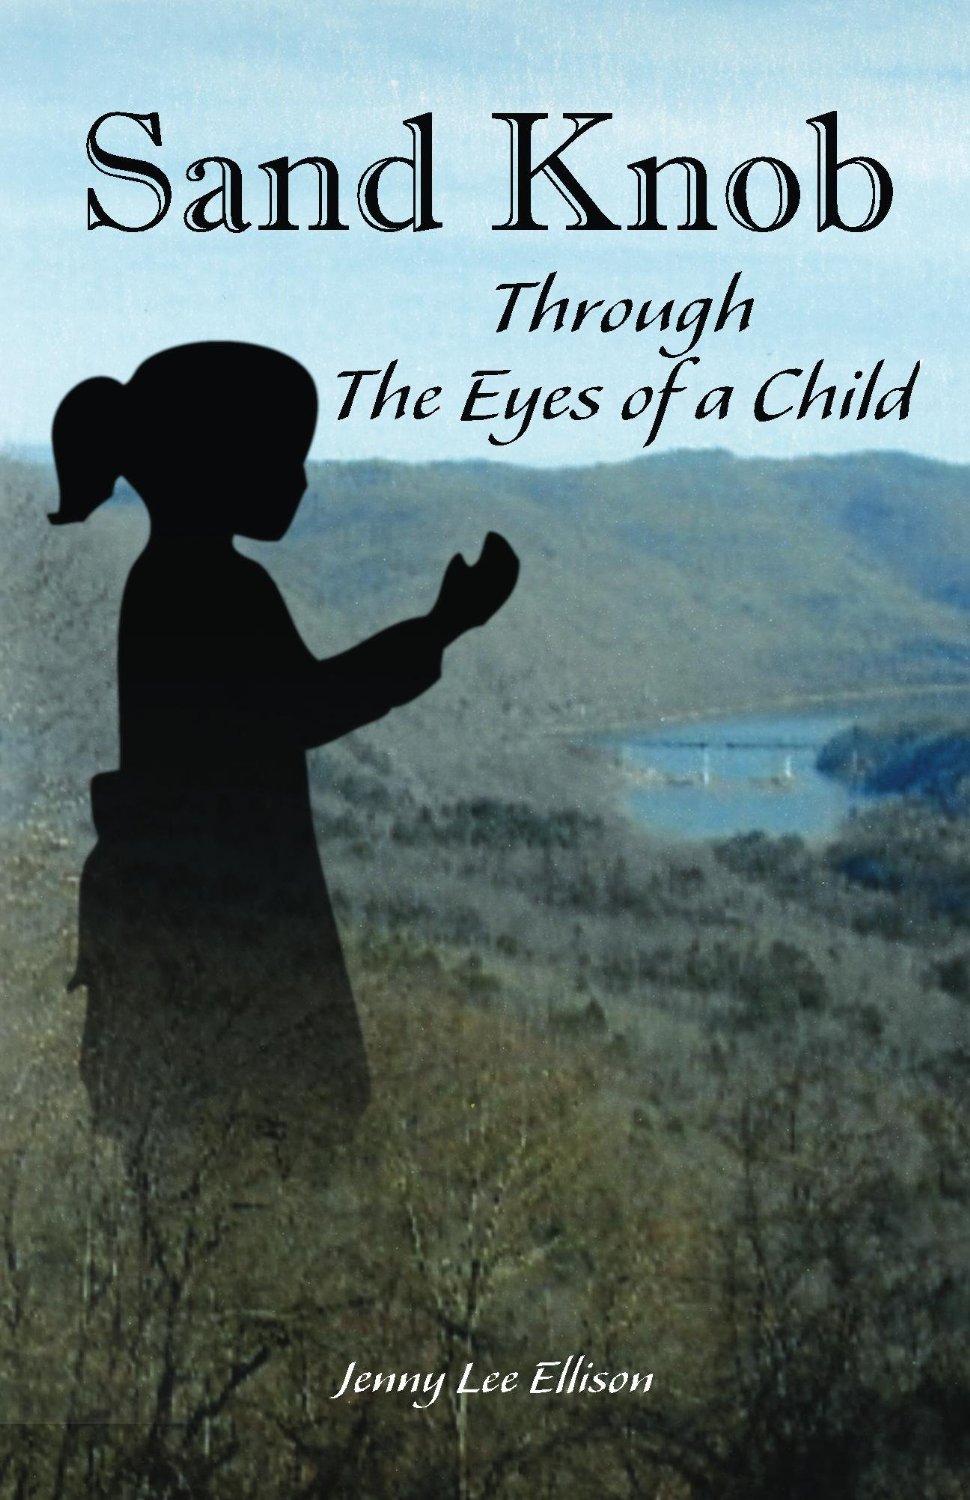 Sand Knob through the Eyes of a Child by Jenny Lee Ellison